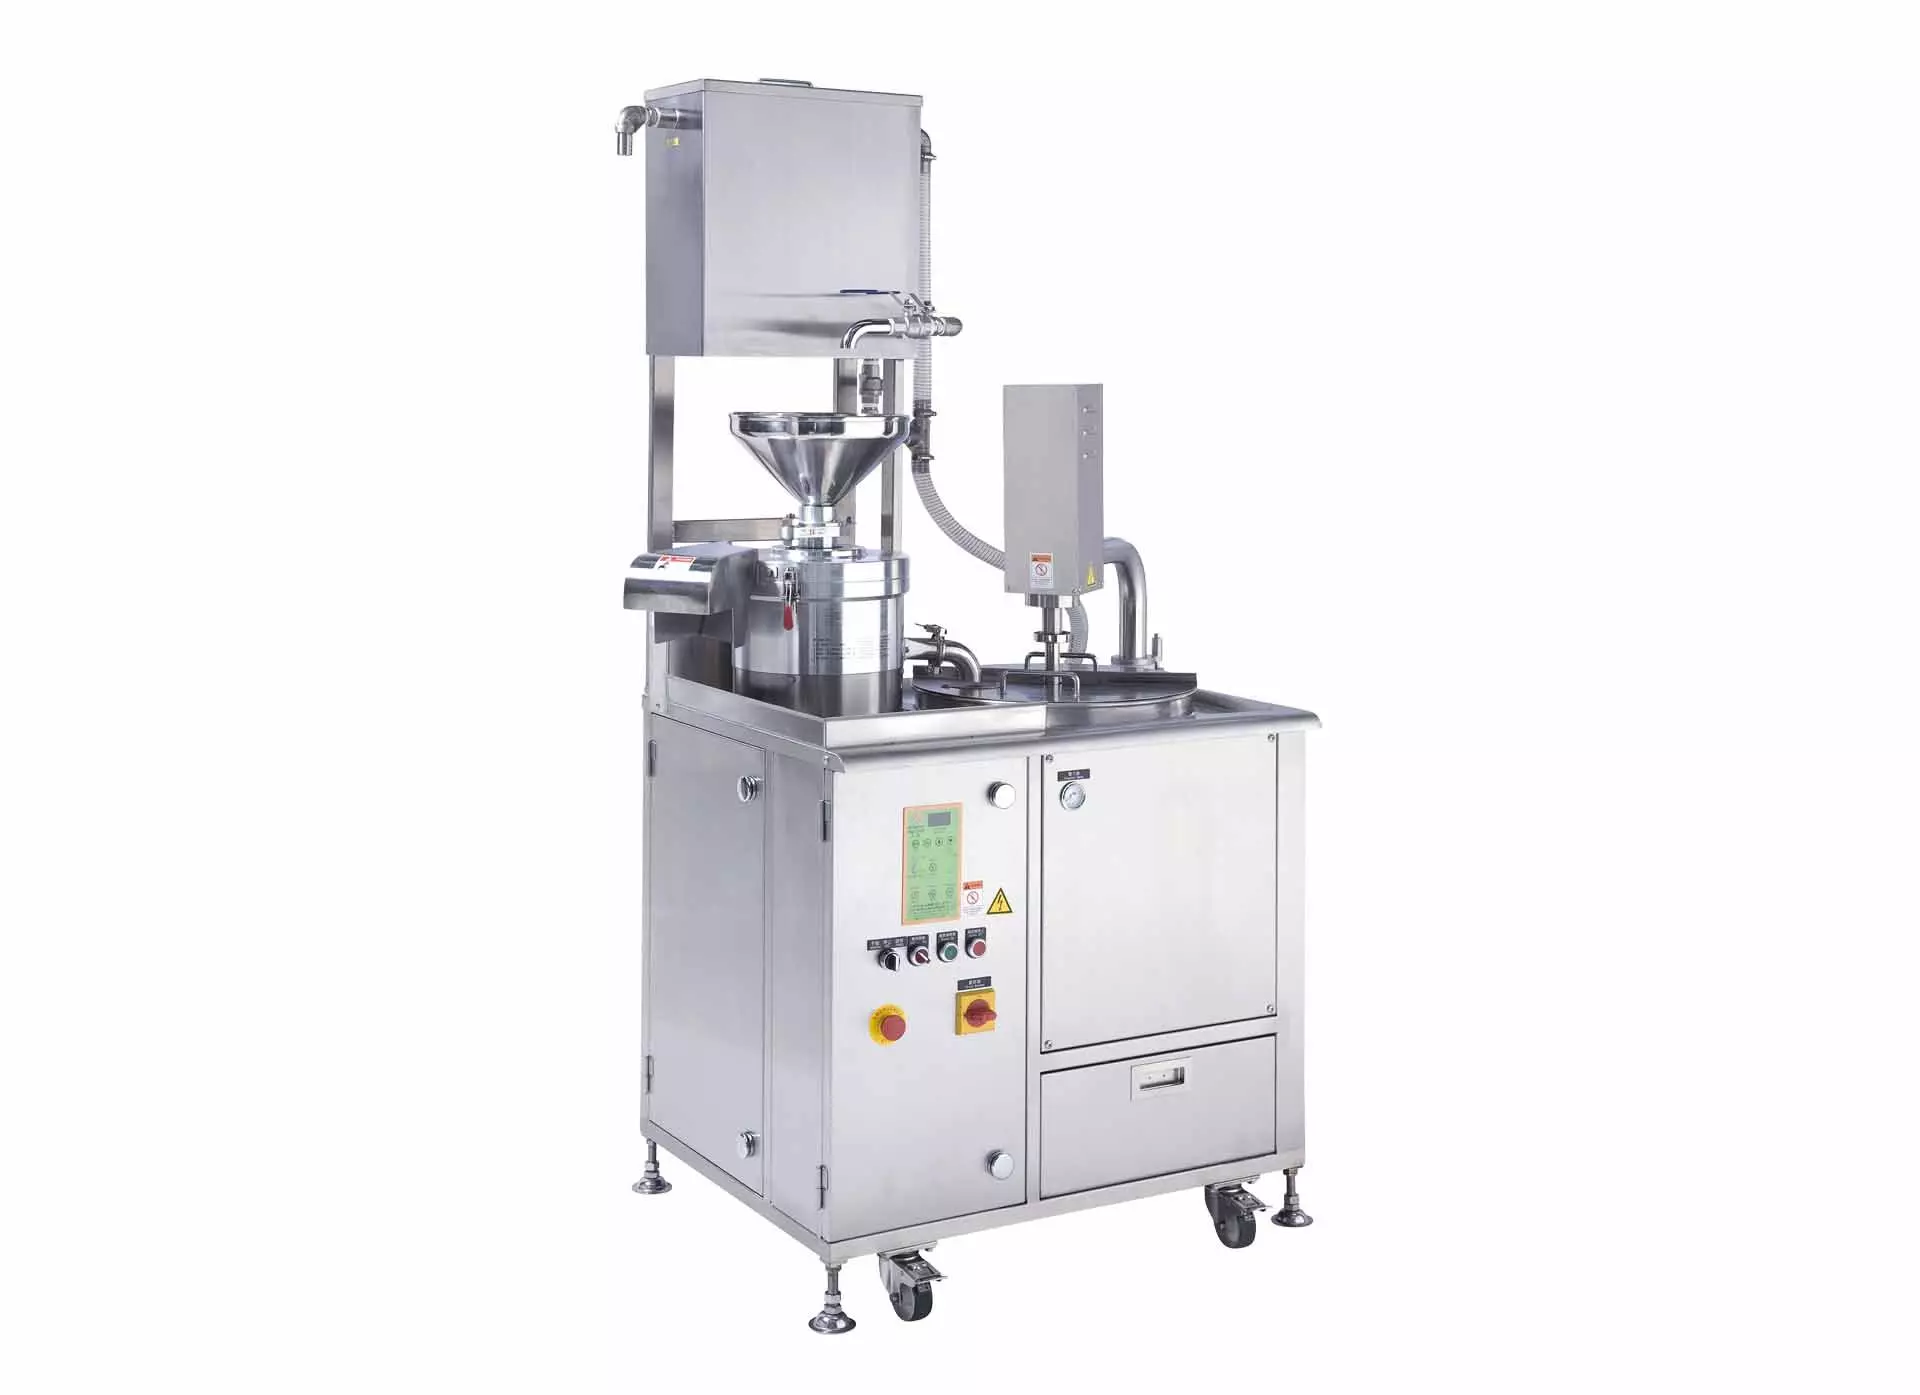 Automatic soy milk Cooking Machine, Smart Cooker, soy milk cooker, Commercial cooker, Commercial Cooking Machine, soy milk Cooking Machine, soya milk Cooking Machine, soybean milk Cooking Machine